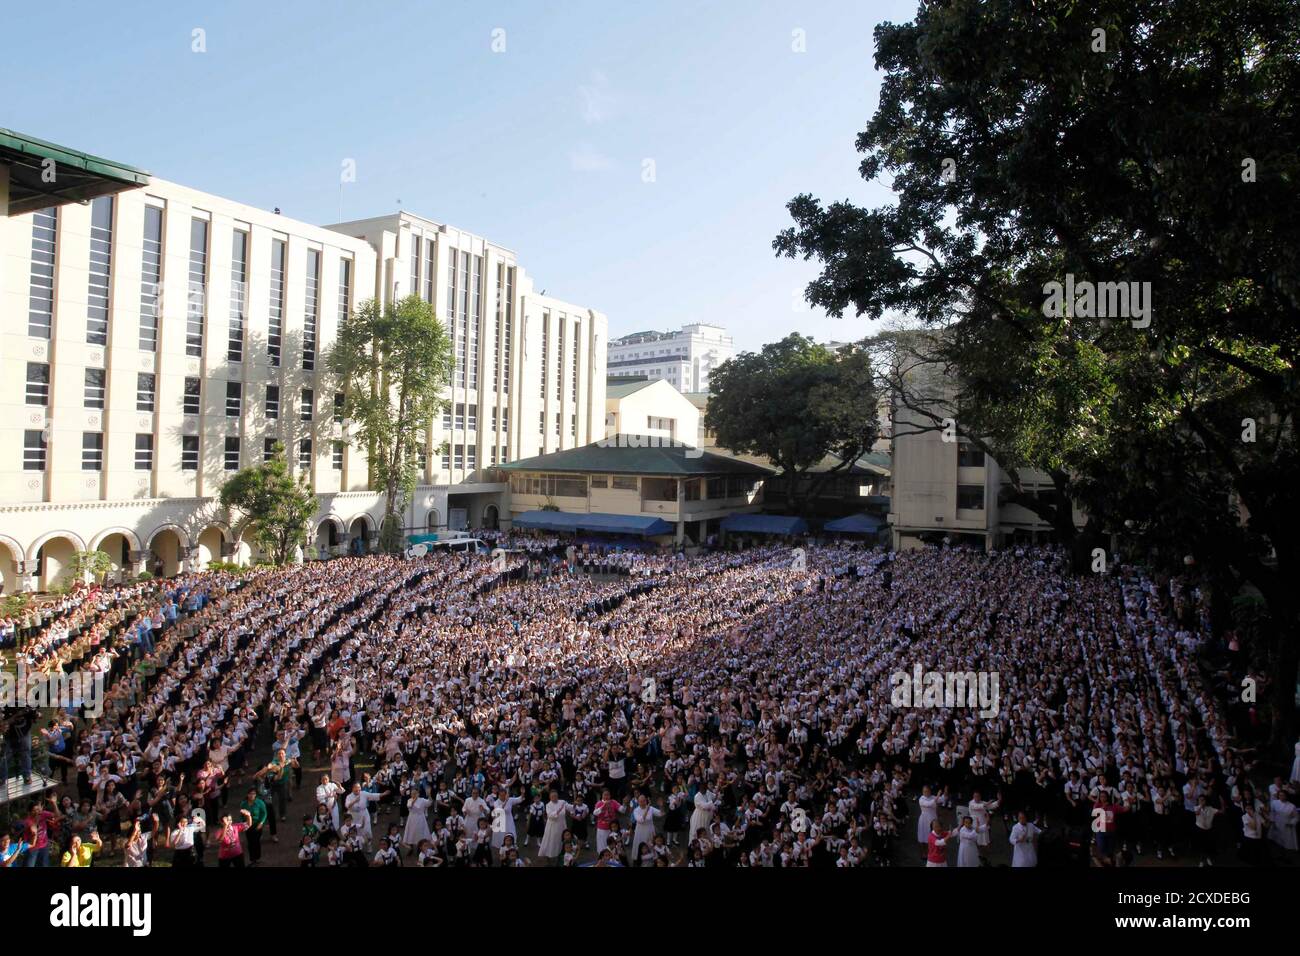 Thousands of students and faculty members dance to the theme song of the One Billion Rising campaign in the quadrangle of the St. Scholastica college in Manila February 14, 2013. One Billion Rising is a global campaign to call for an end to violence against women and girls, according to its organisers.  REUTERS/Romeo Ranoco (PHILIPPINES - Tags: POLITICS SOCIETY EDUCATION) Stock Photo